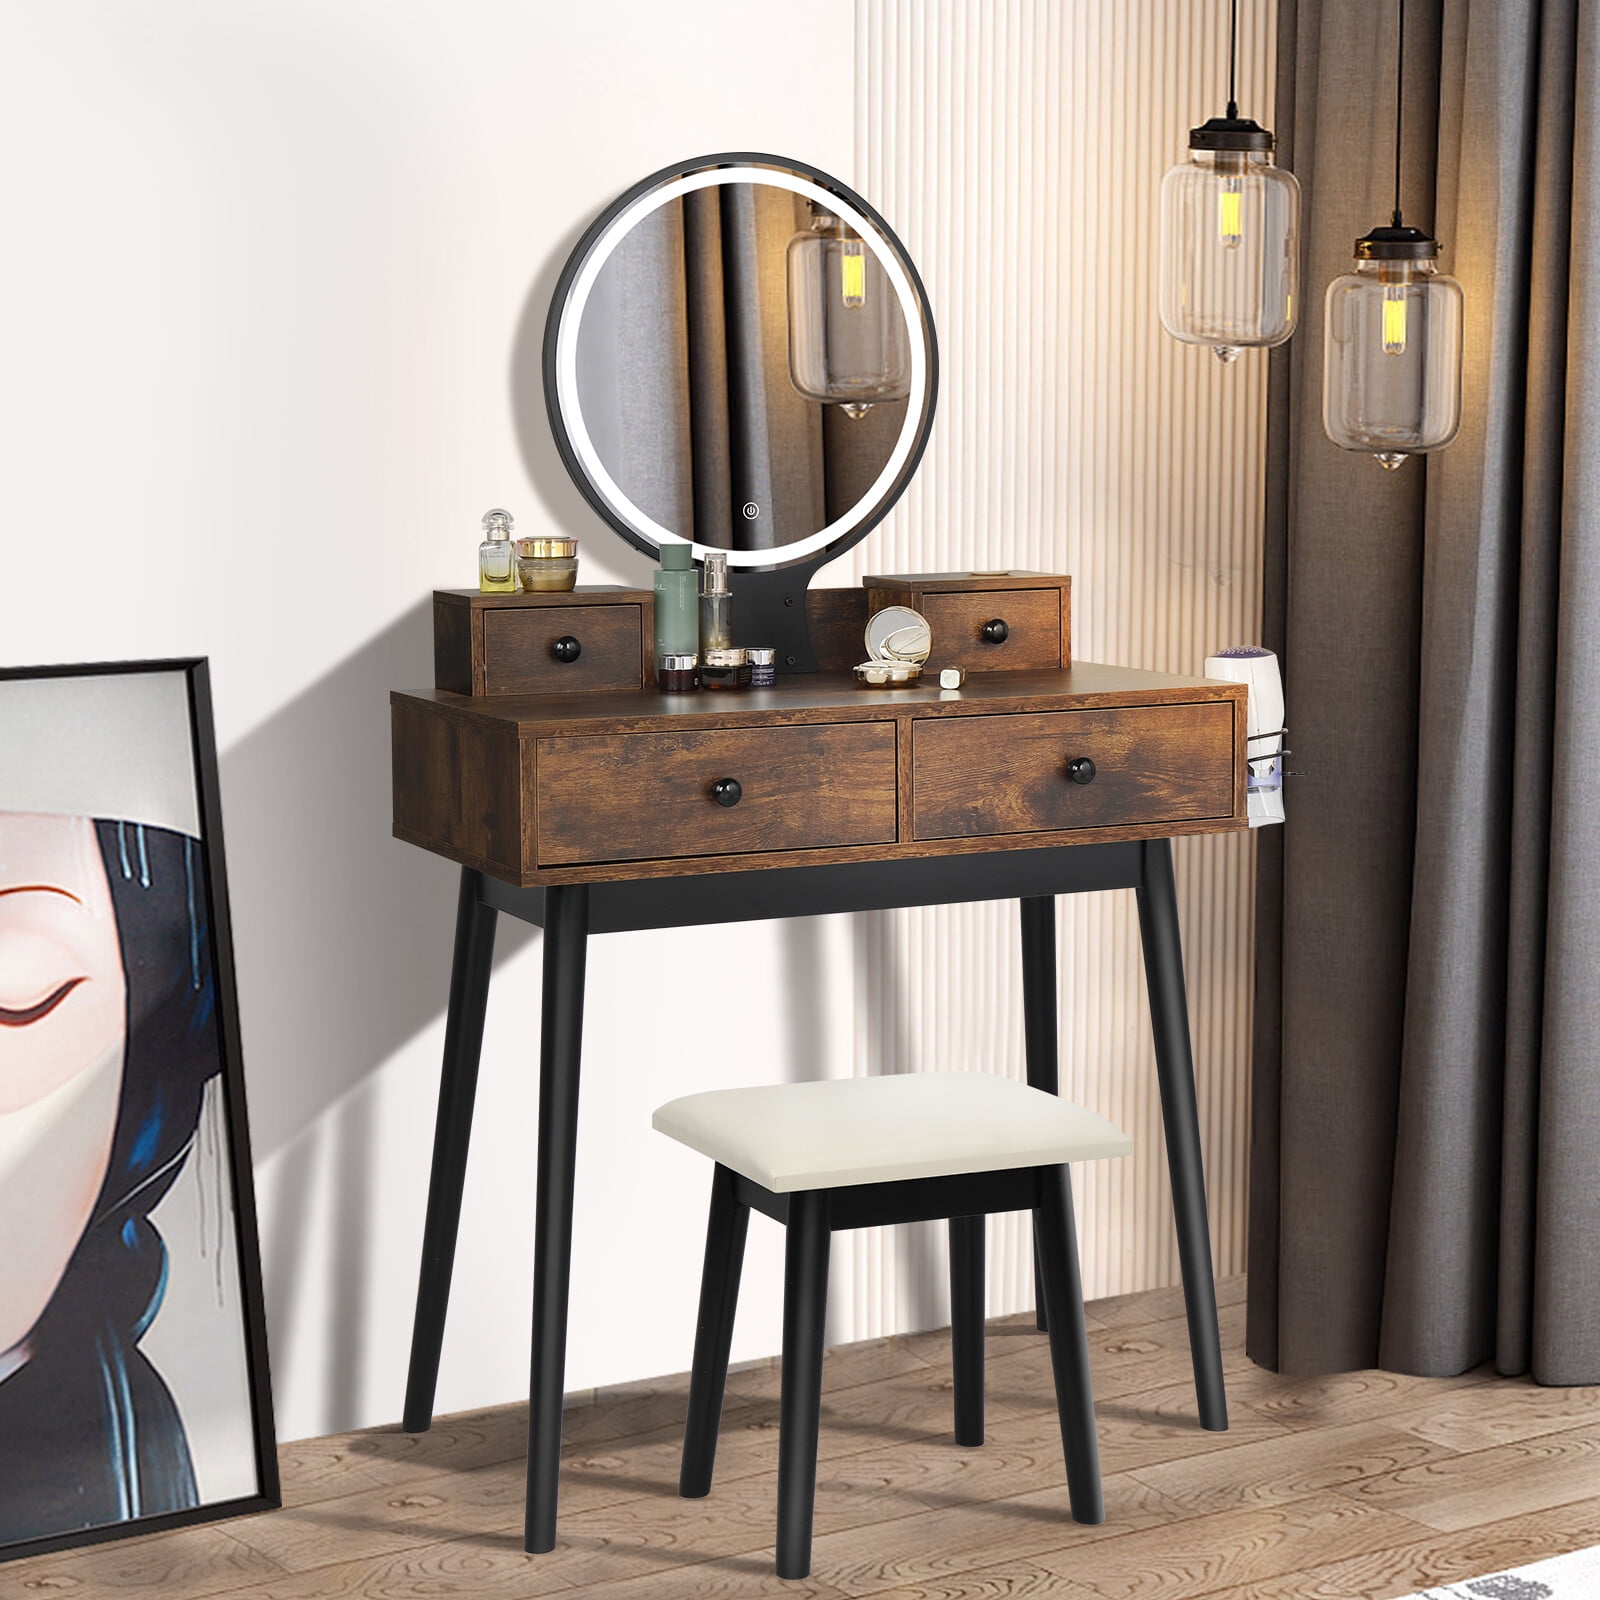 Details about   Bedroom Makeup Vanity Set Dressing Table w/ Stool 3 Variable Touch LED Light H8 